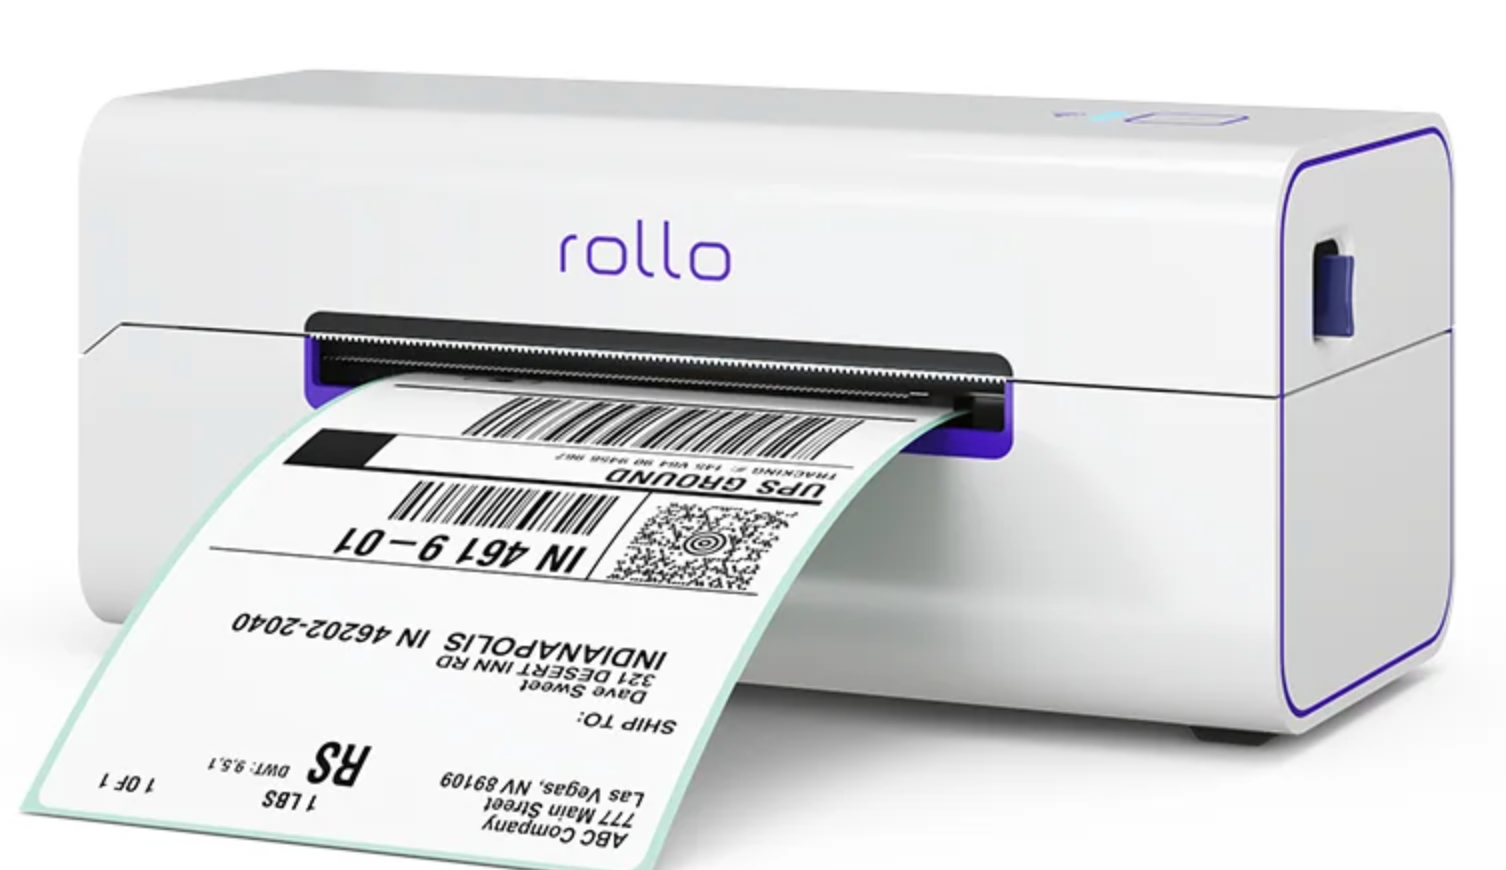 Image of the Rollo Label Printer with label being printed